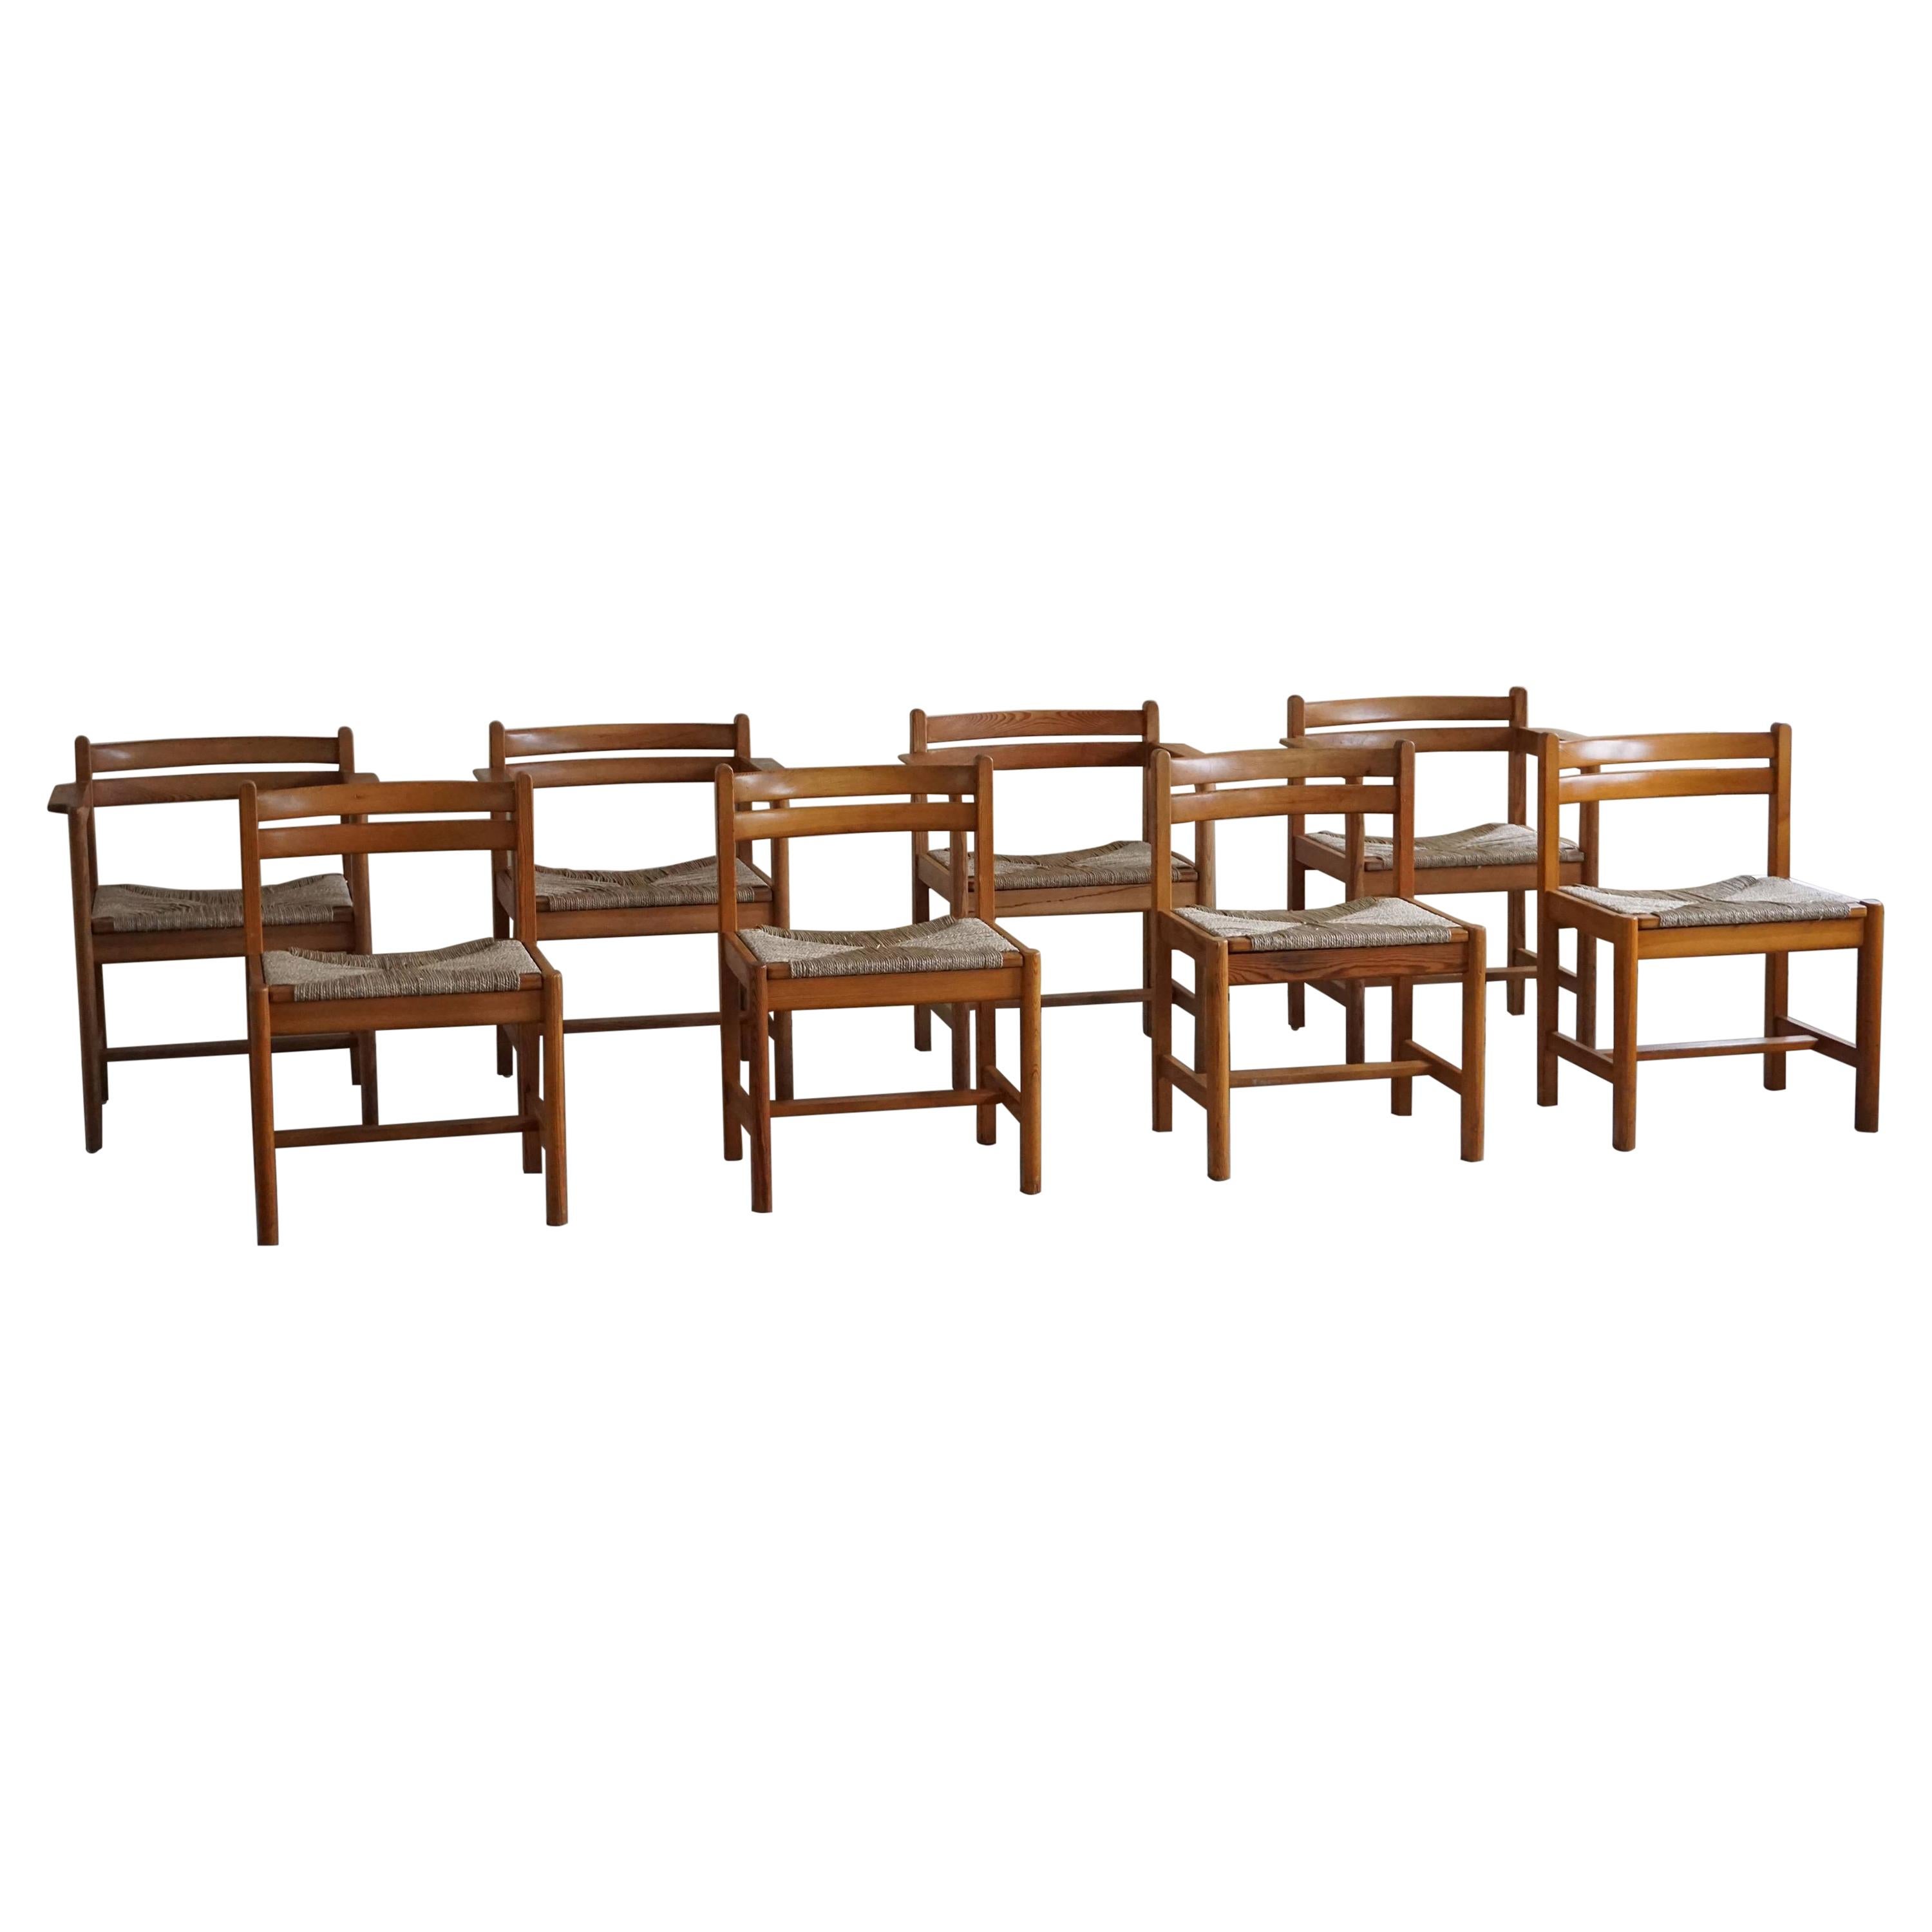 Set of 8 Dining Chairs, Model "Asserbo" by Børge Mogensen, for AB Karl Andersson